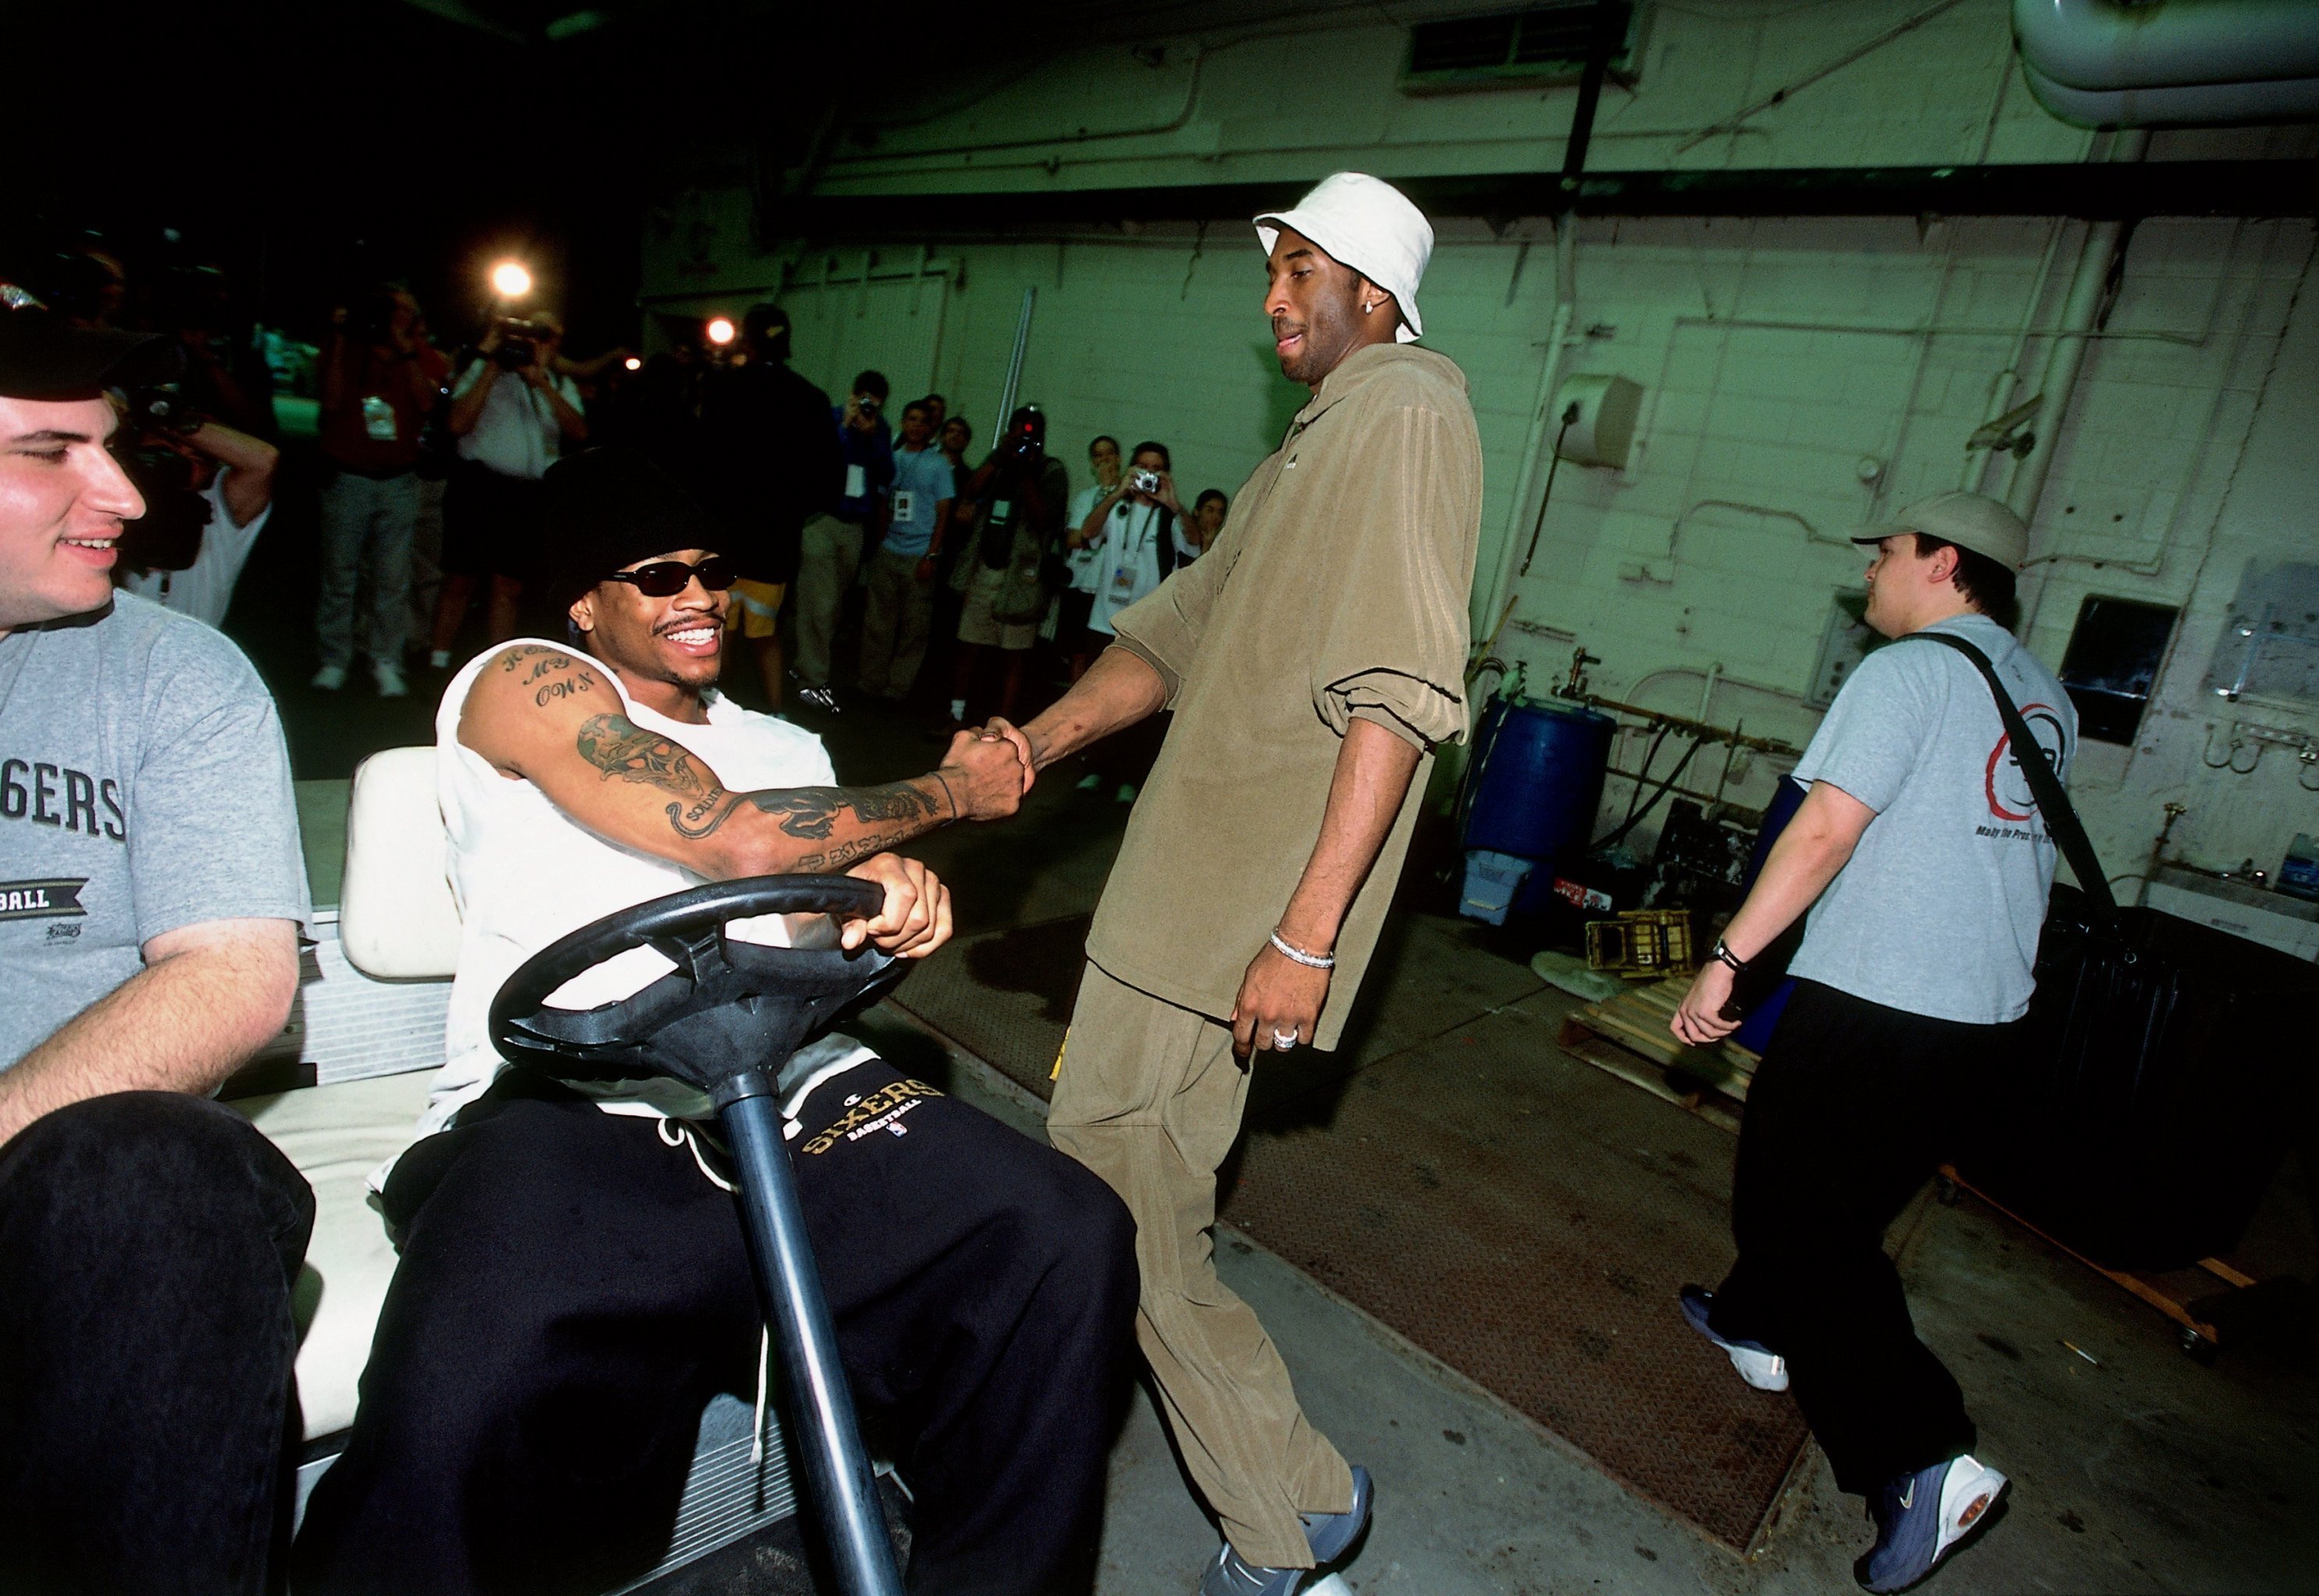 The Rarely Told Story Behind Allen Iverson's Infamous 'Practice' Rant